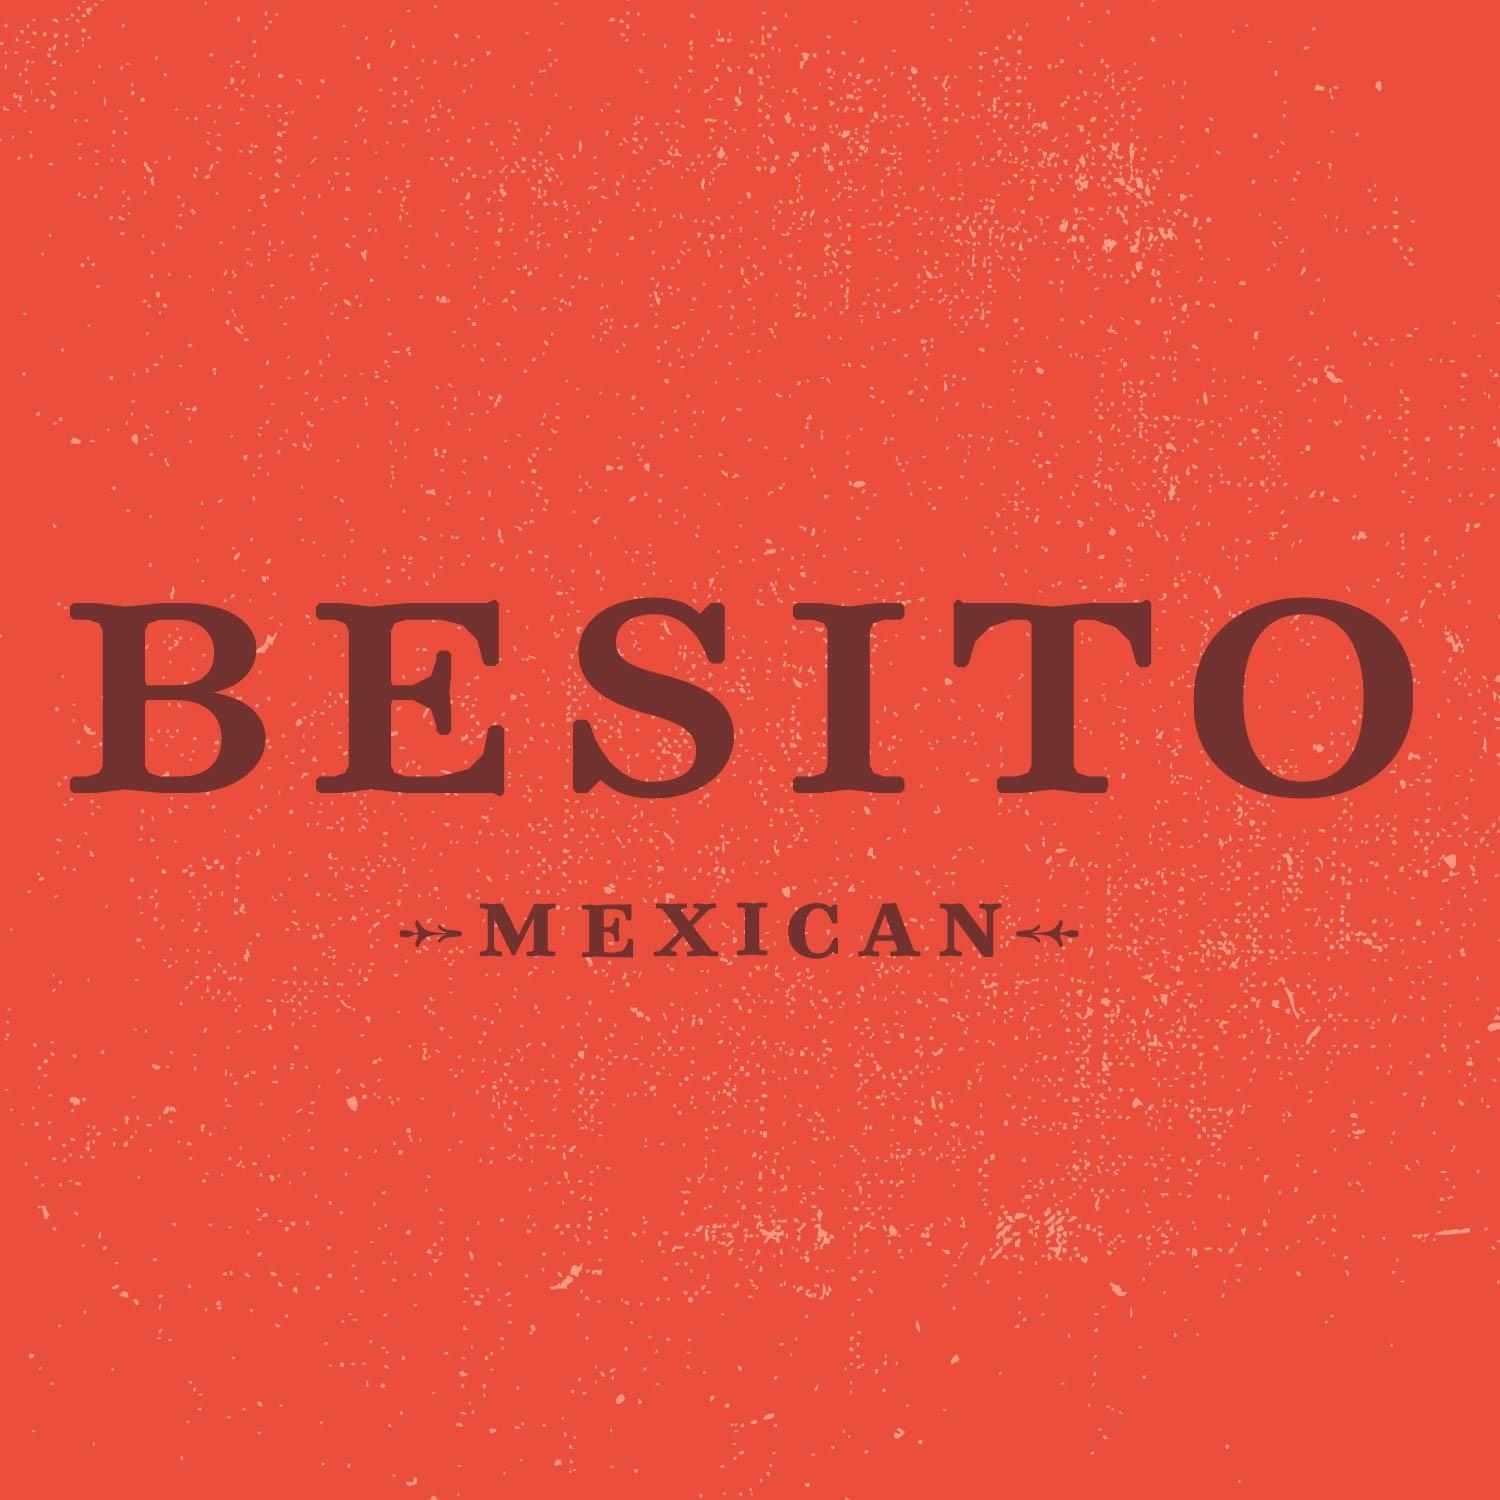 You can follow Besito on Instagram & Facebook @besitomexican instead!